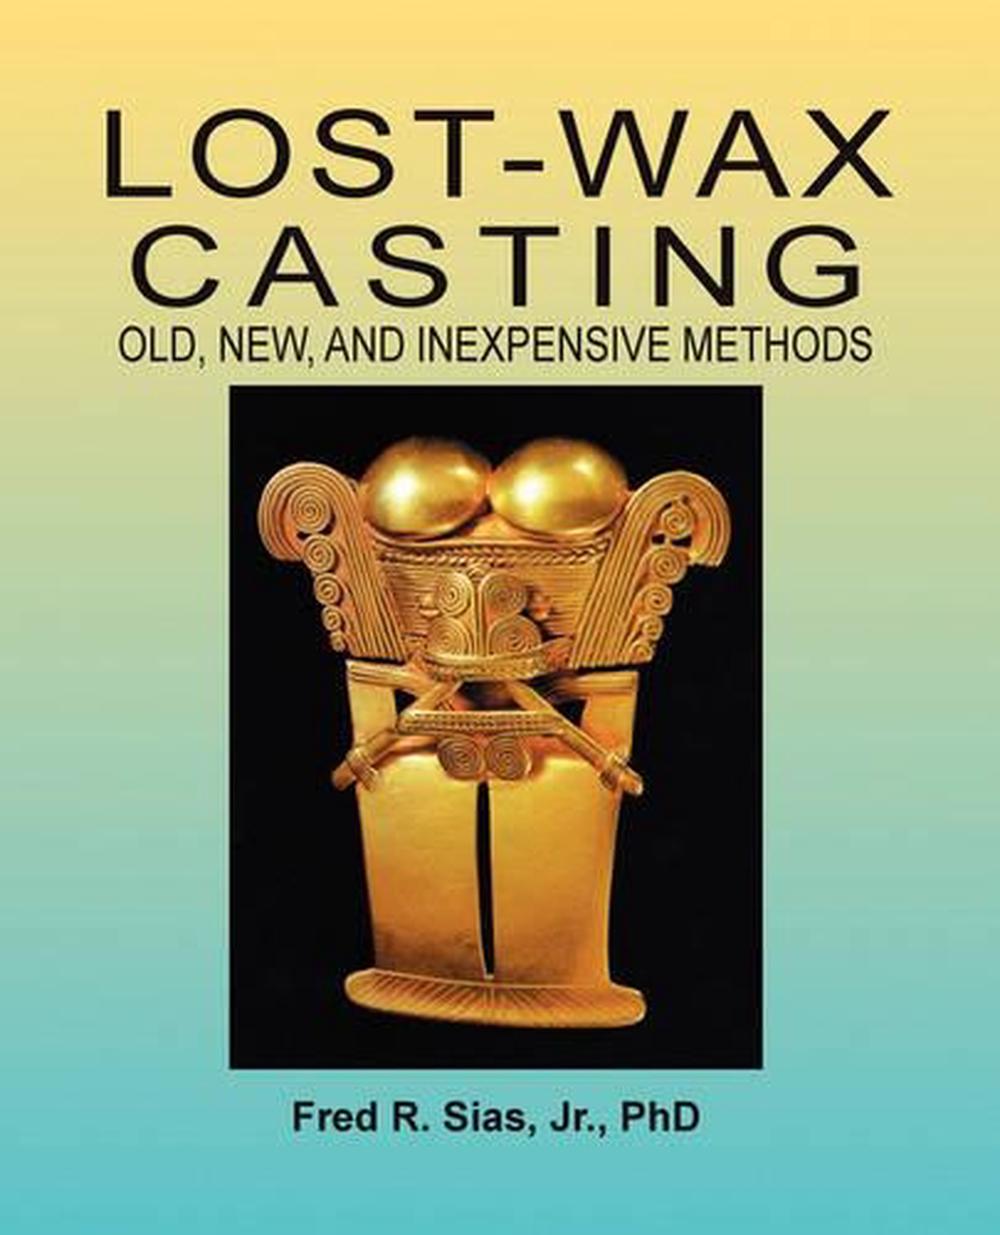 LostWax Casting Old, New, and Inexpensive Methods by F.R. Sias (English) Paper 9780967960005